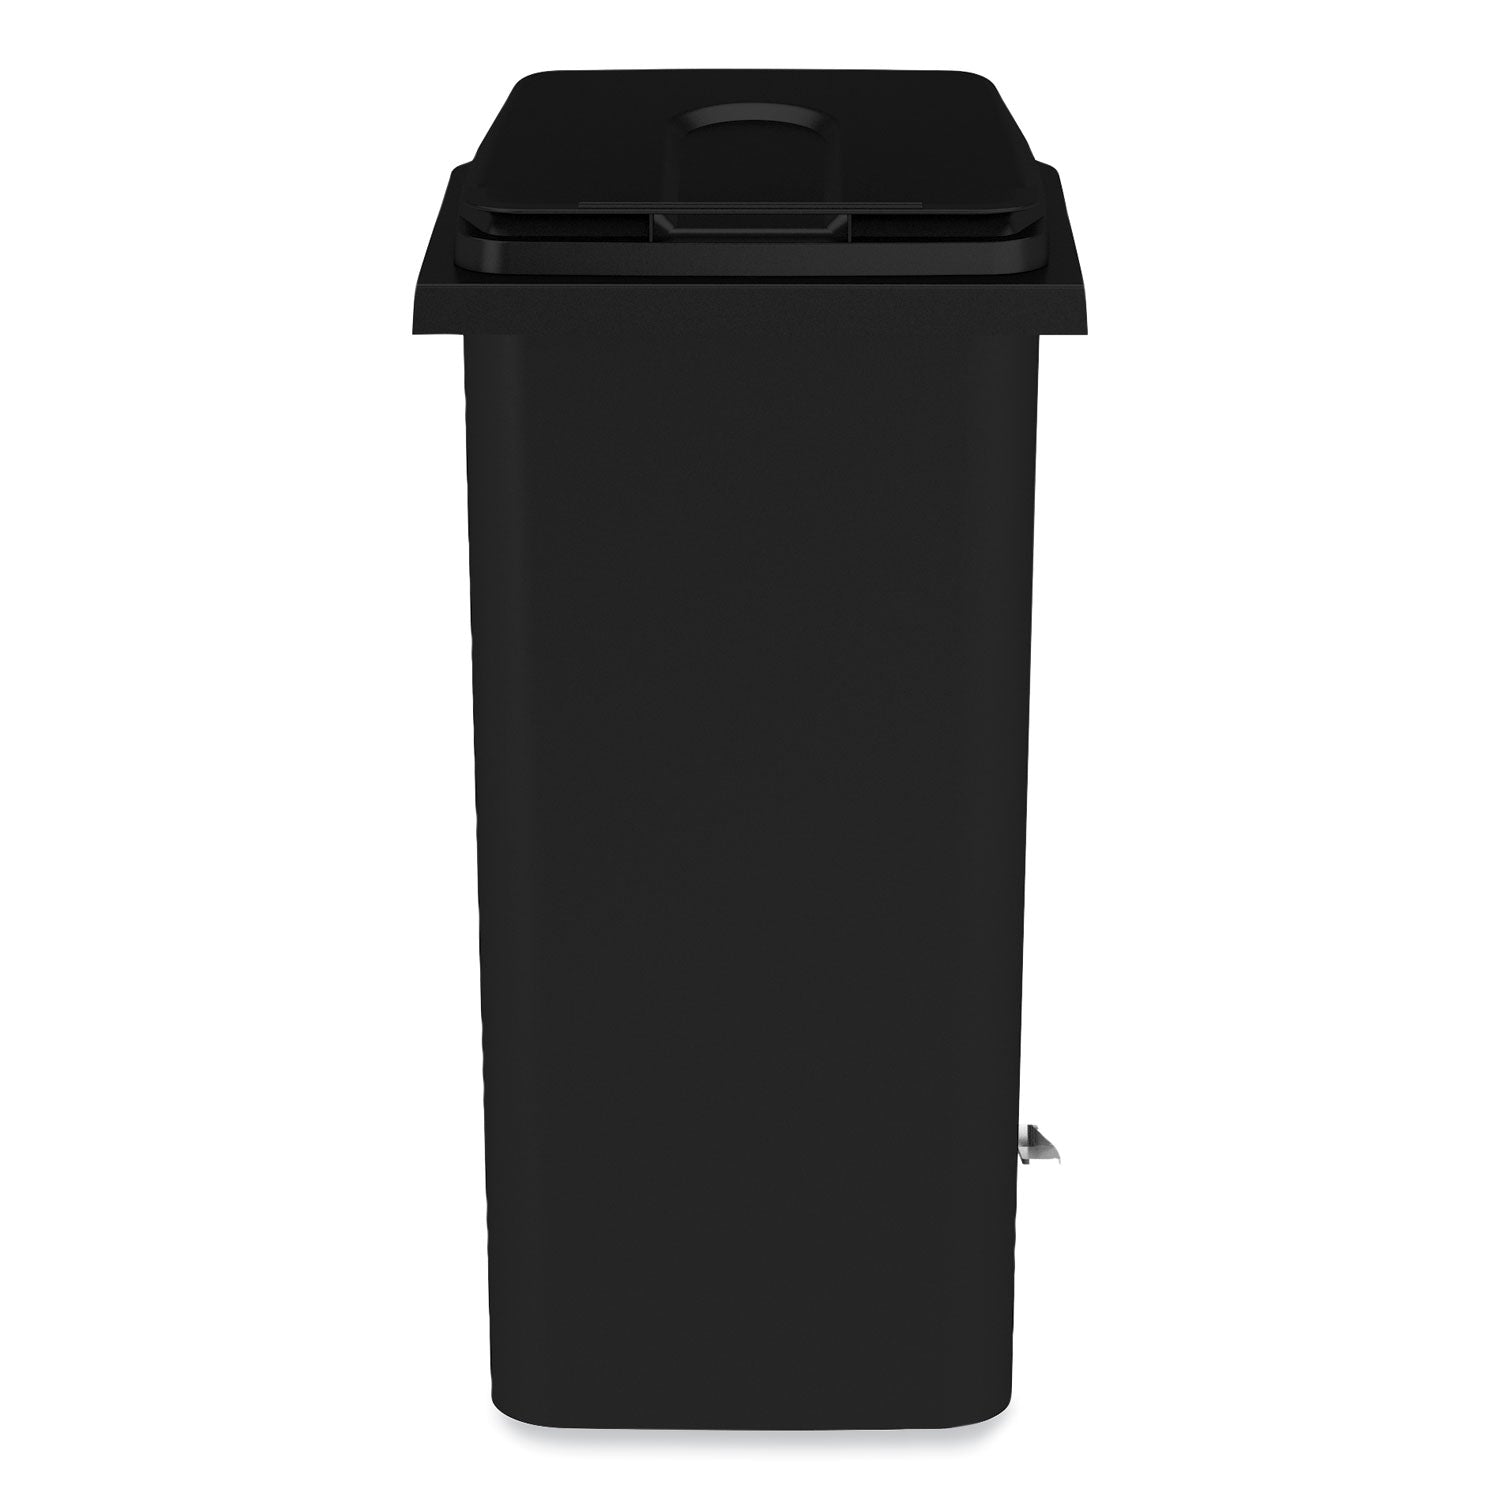 Safco 32 Gallon Plastic Step-On Receptacle - 32 gal Capacity - Easy to Clean, Foot Pedal, Lightweight, Handle, Wheels, Mobility - 37" Height x 21.3" Width x 20" Depth - Plastic - Black - 1 Carton - 2